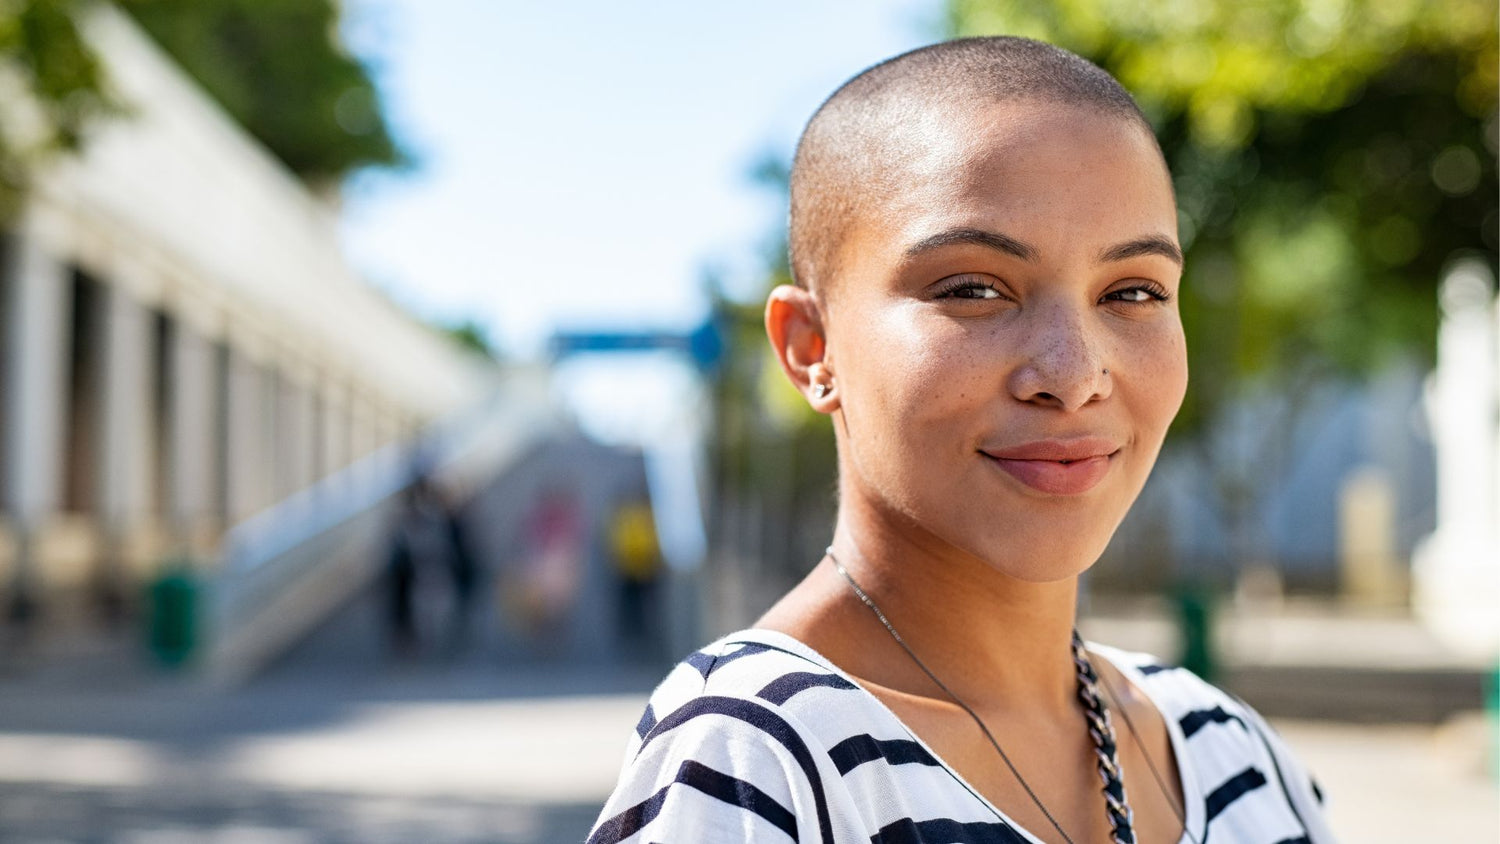 Should I Shave My Head? The Benefits of Going Bald